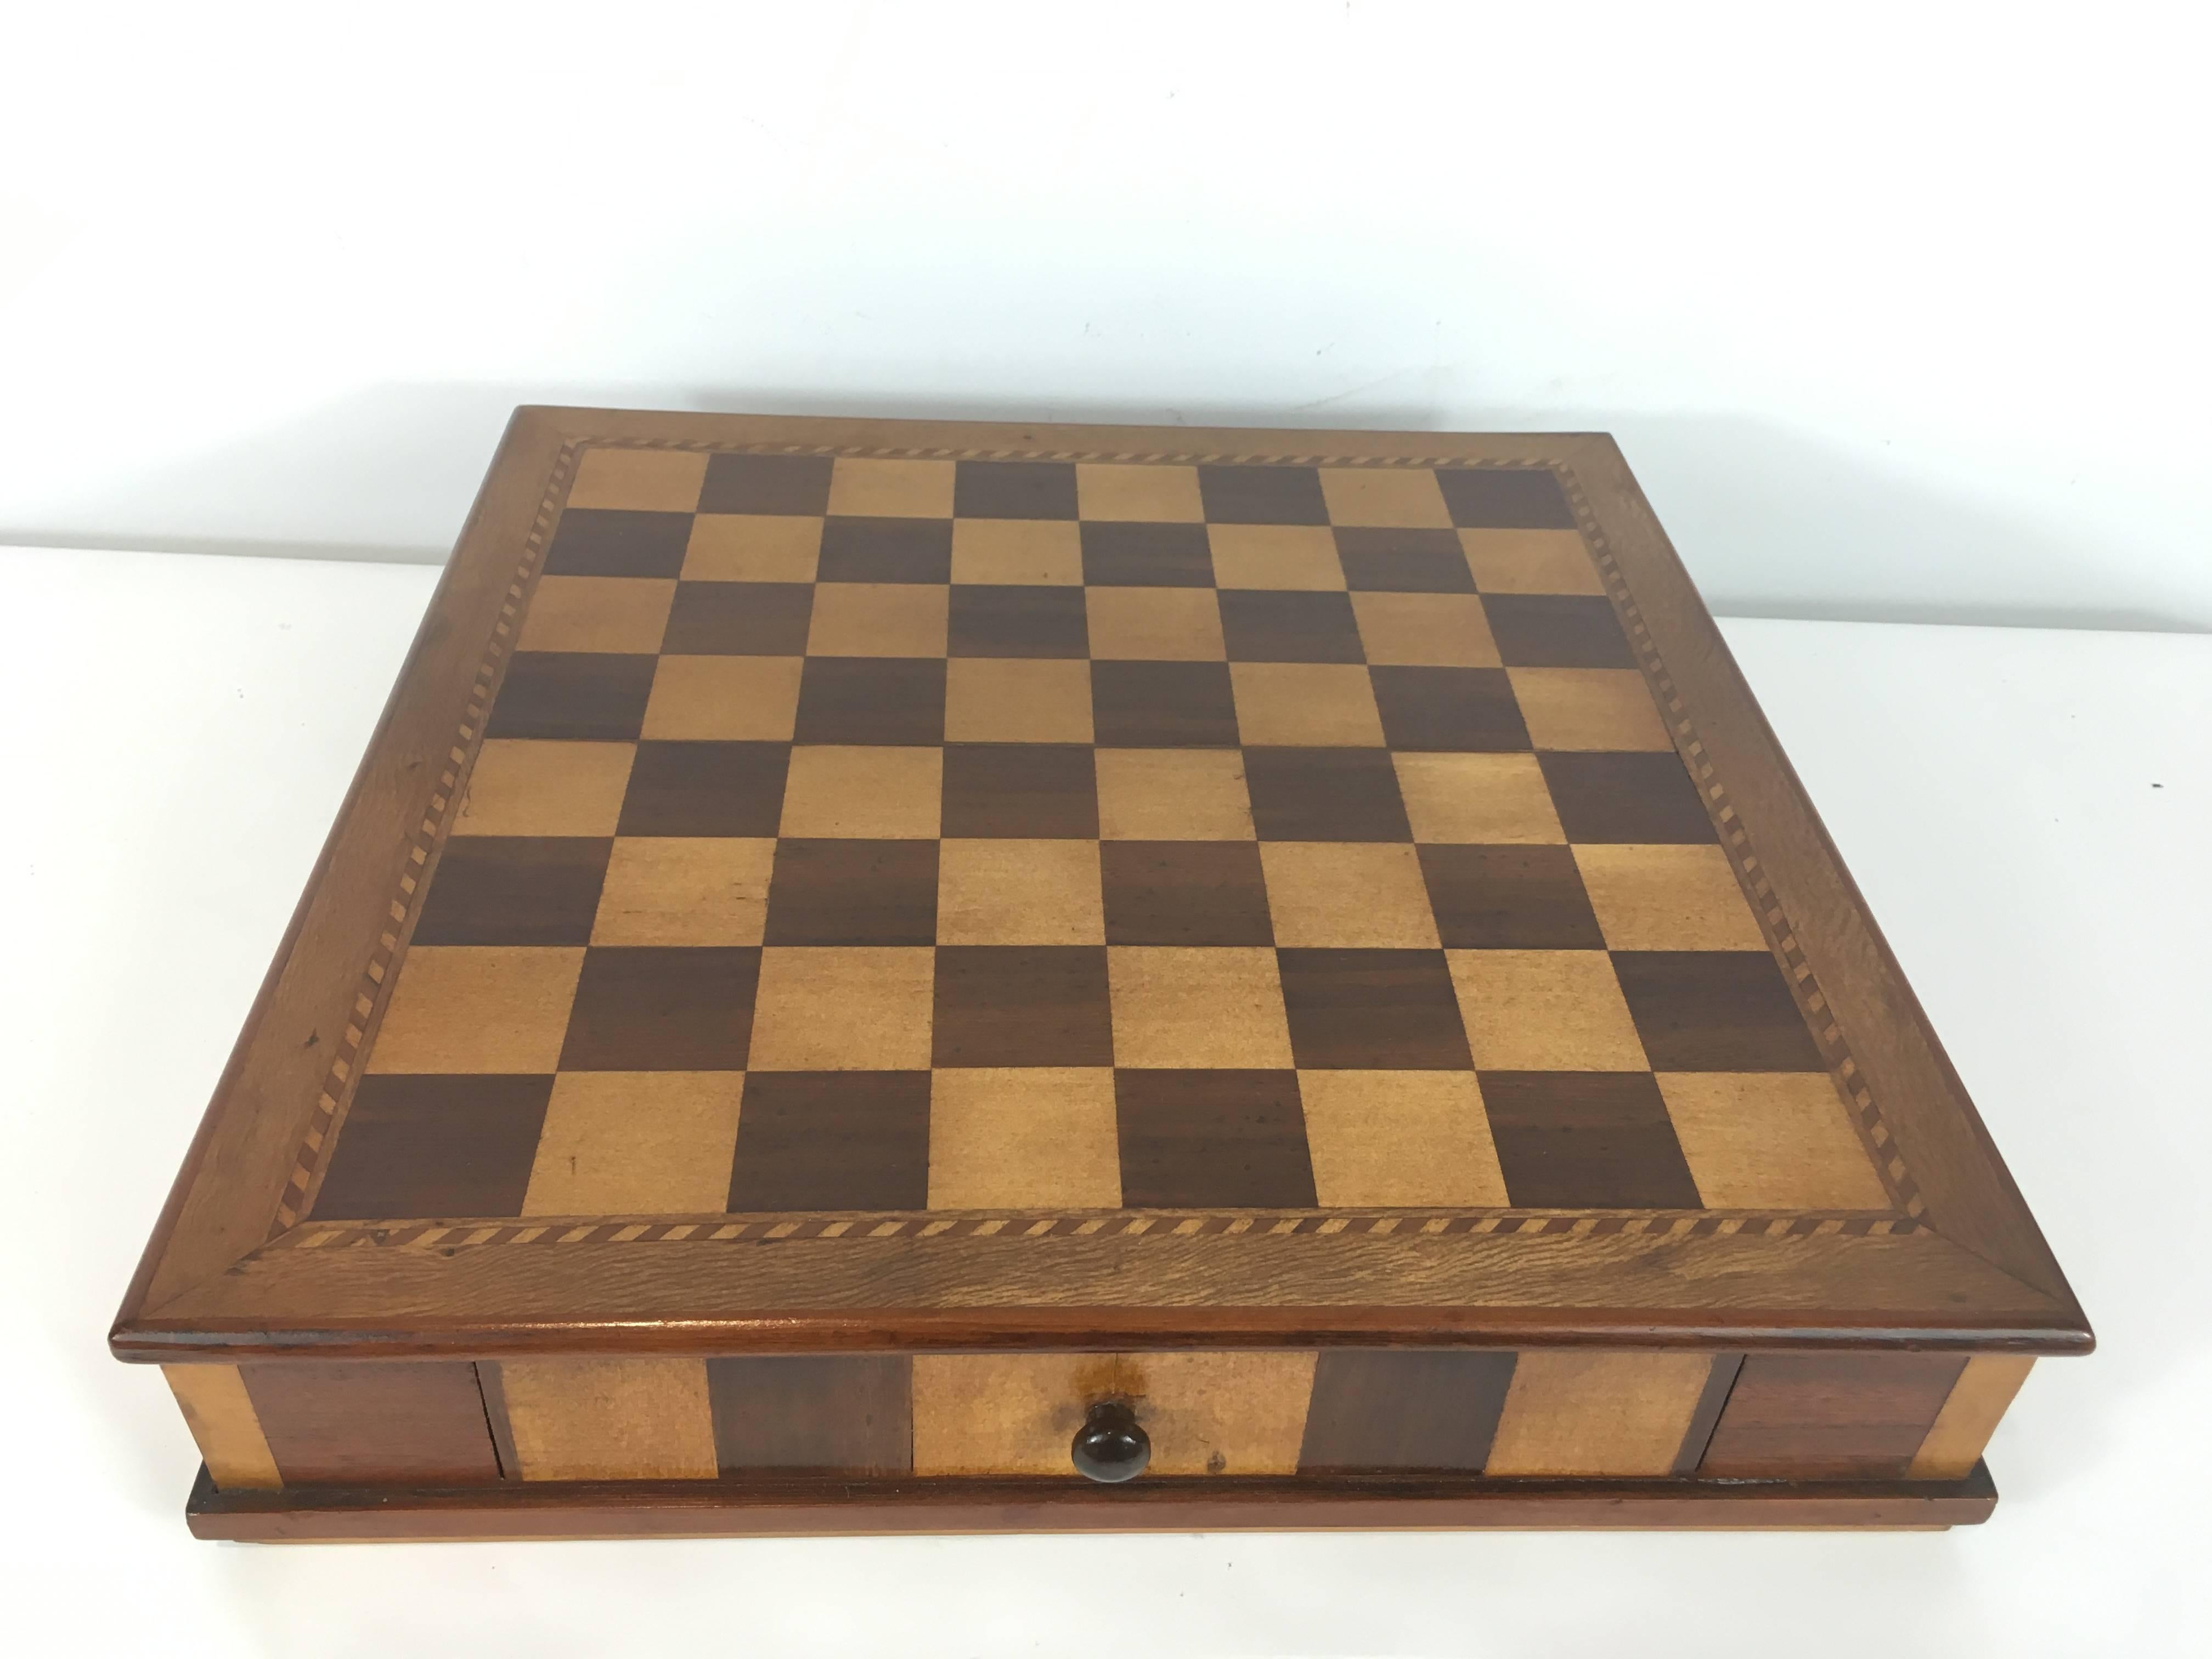 Victorian Chess Set, Of square form with inlaid exotic woods, all self contained with pull out drawer with 32 hand craved chess pieces